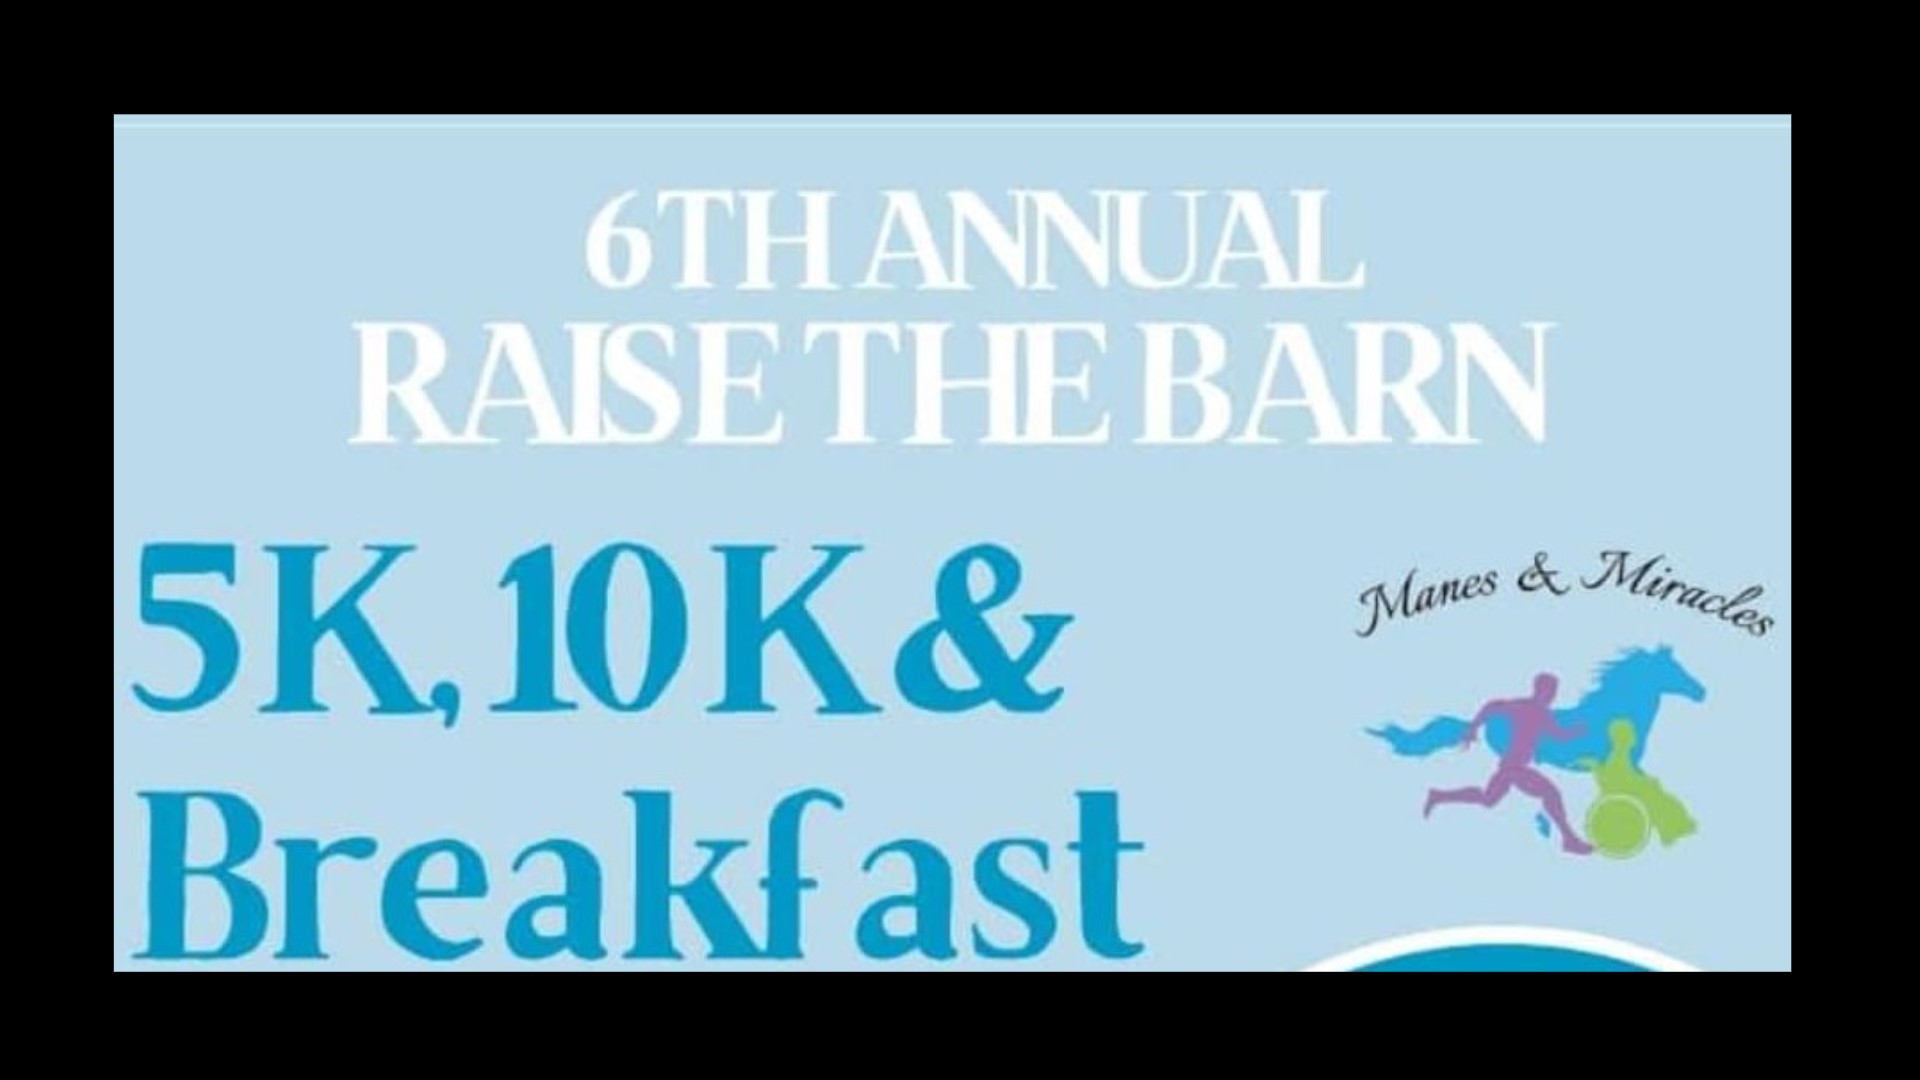 It's the 5K/10K event to help raise money for a new barn facility.  Daren finds out more about Manes and how to register for the event.